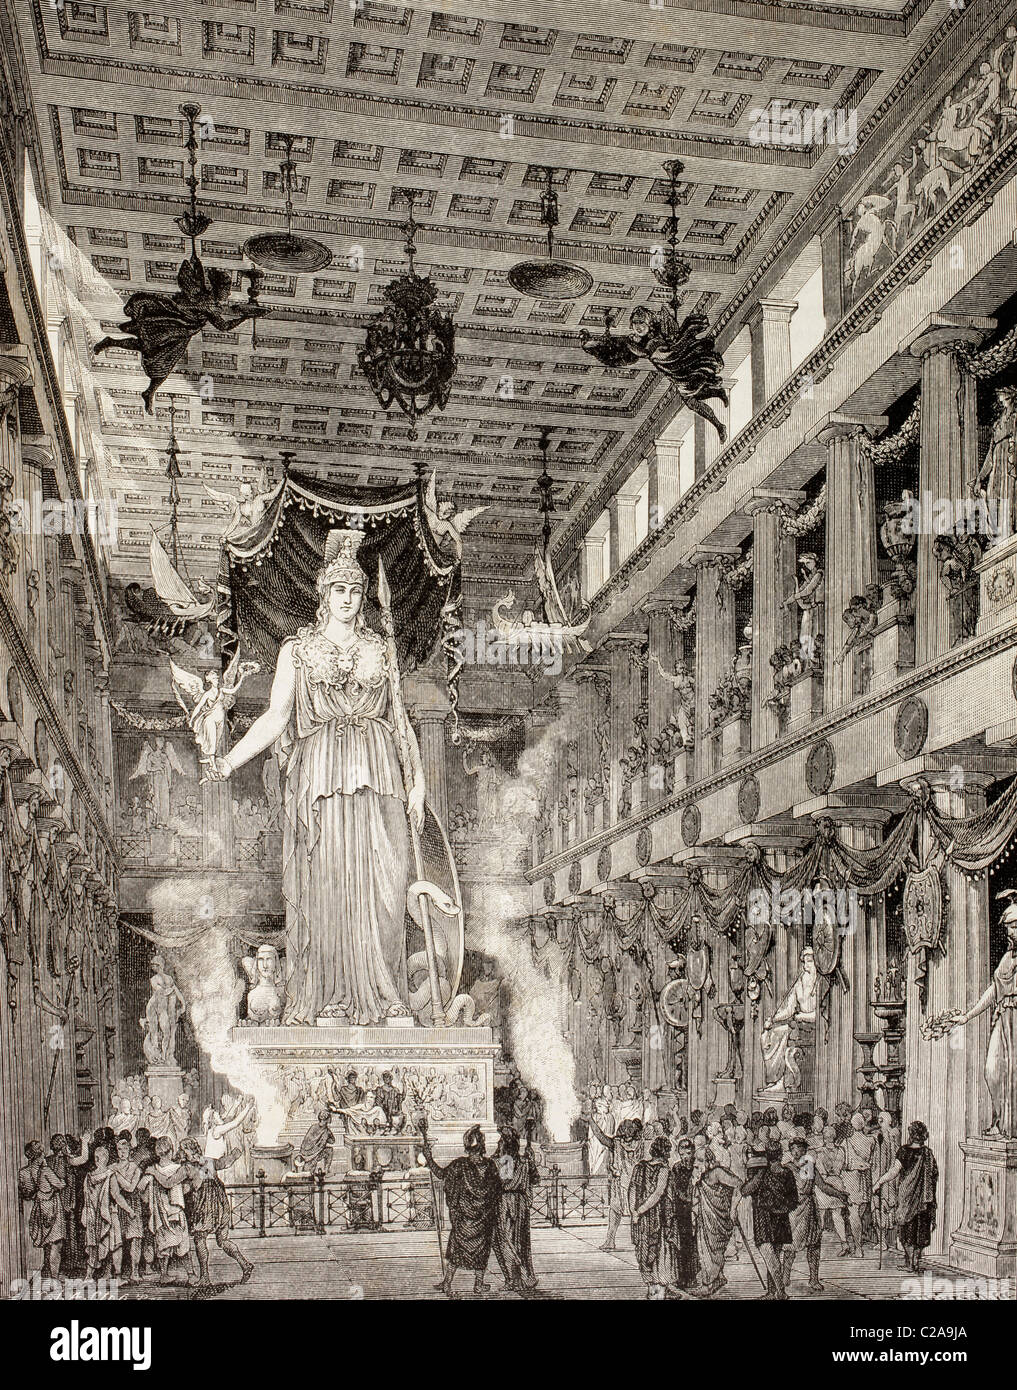 Artist's impression of the Parthenon, Athens, Greece, during the Classical period. Statue of the Goddess Athena, centre. Stock Photo